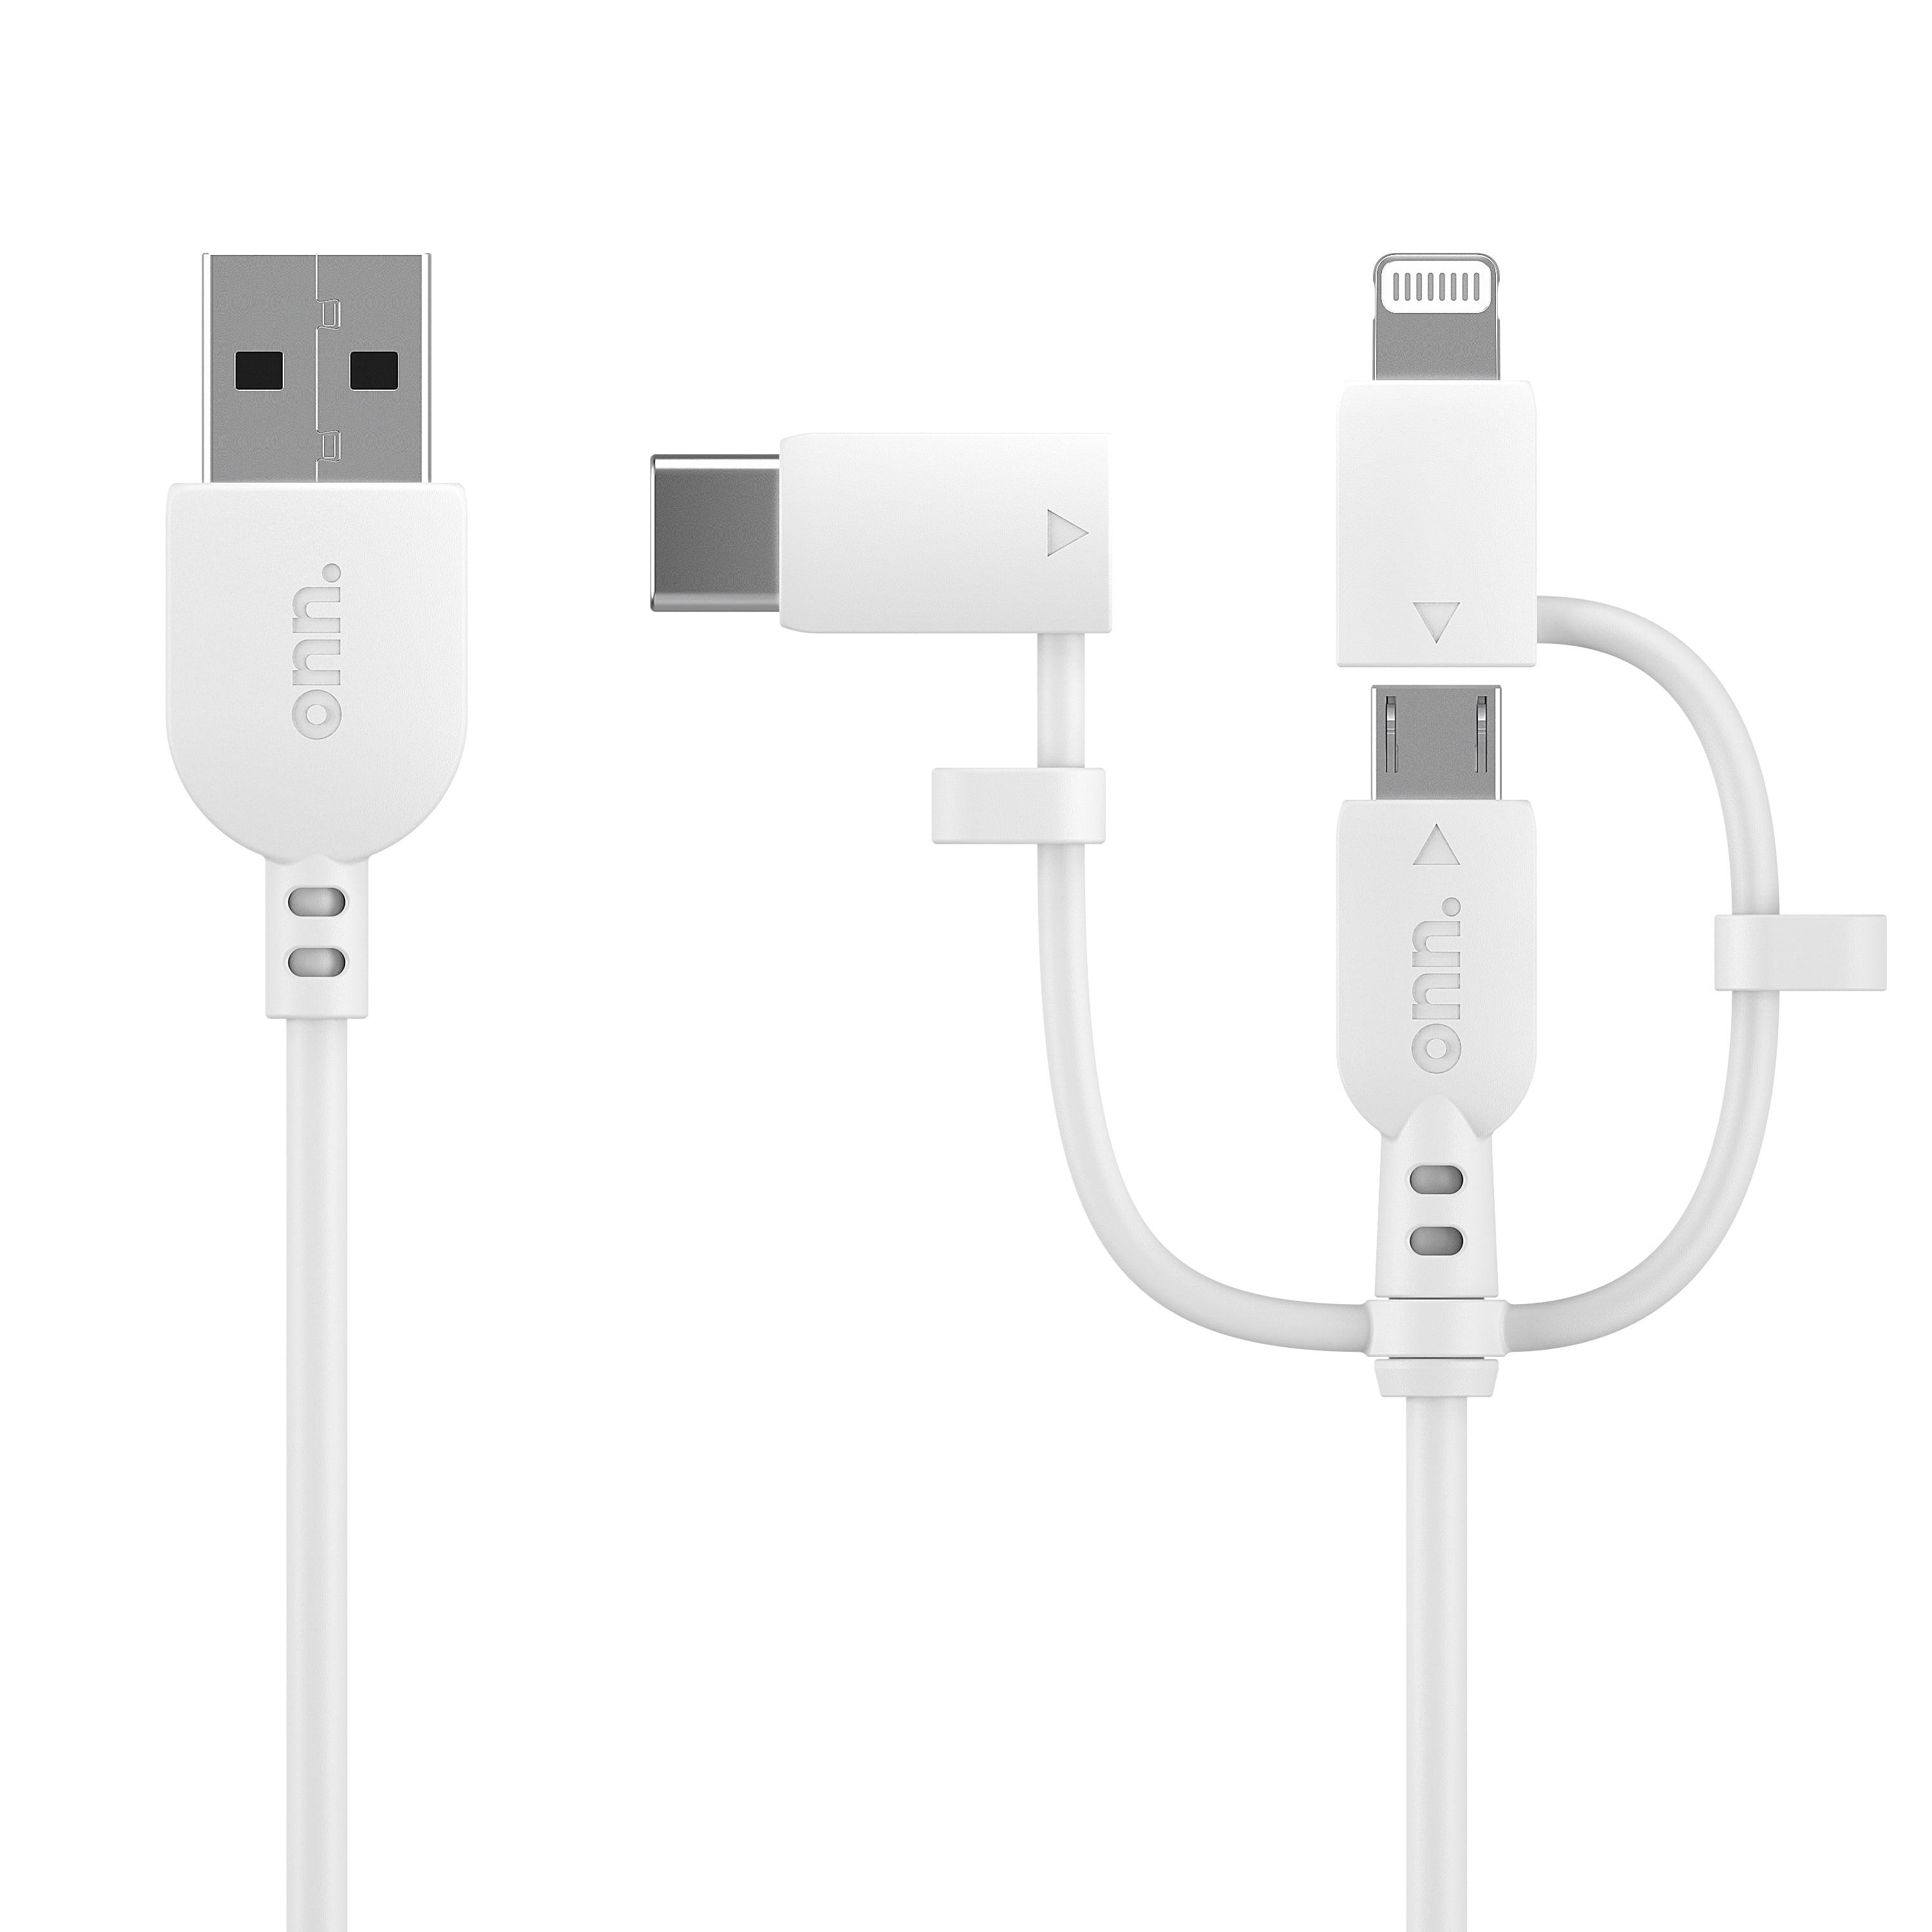 onn. 3' Tri-Tip to USB Cable, Lightning/Type C/Micro USB Cable for IPhone, IPad, LG, Samsung Galaxy, Android Smartphones(3ft, White)